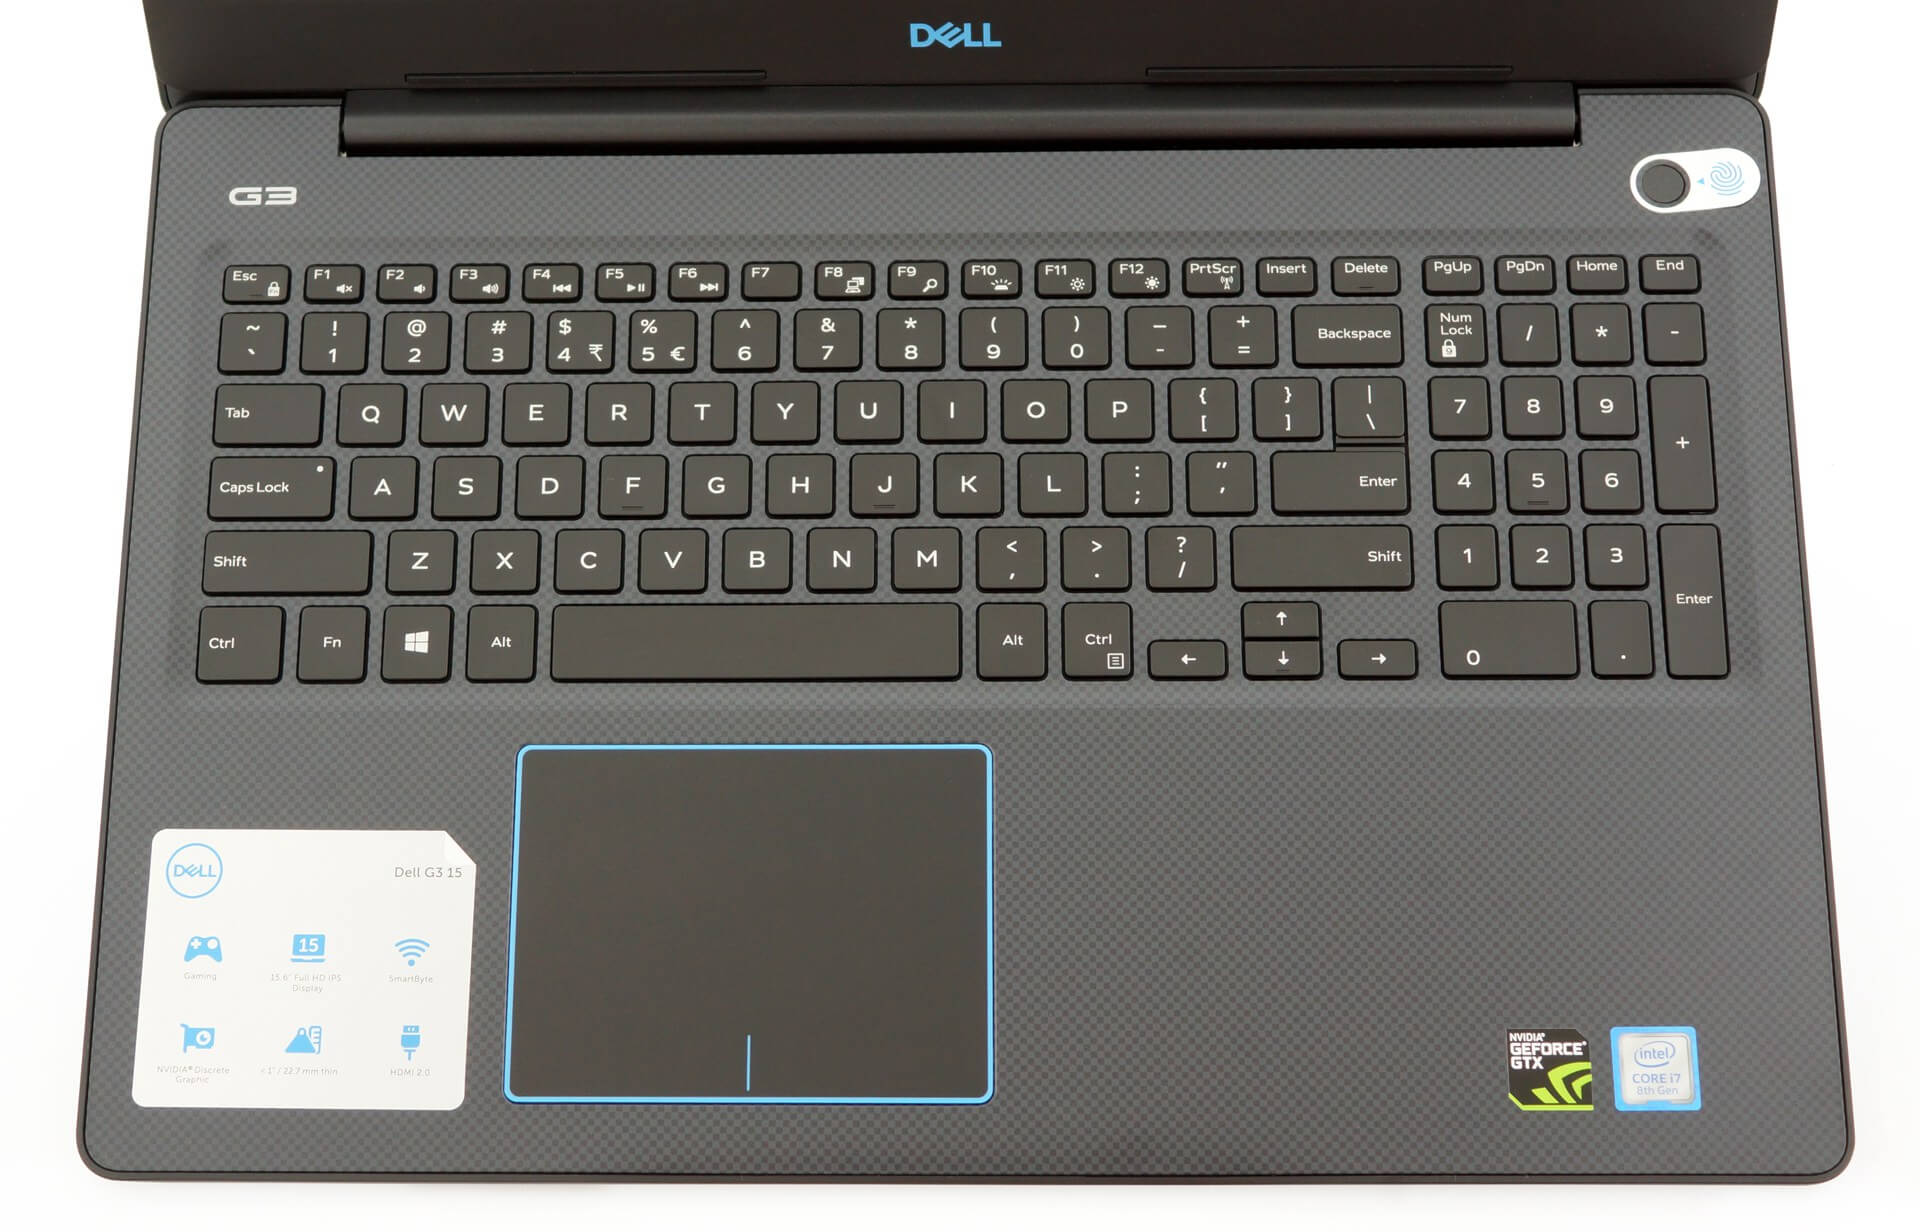 Dell G3 15 (3579) Gaming (New)